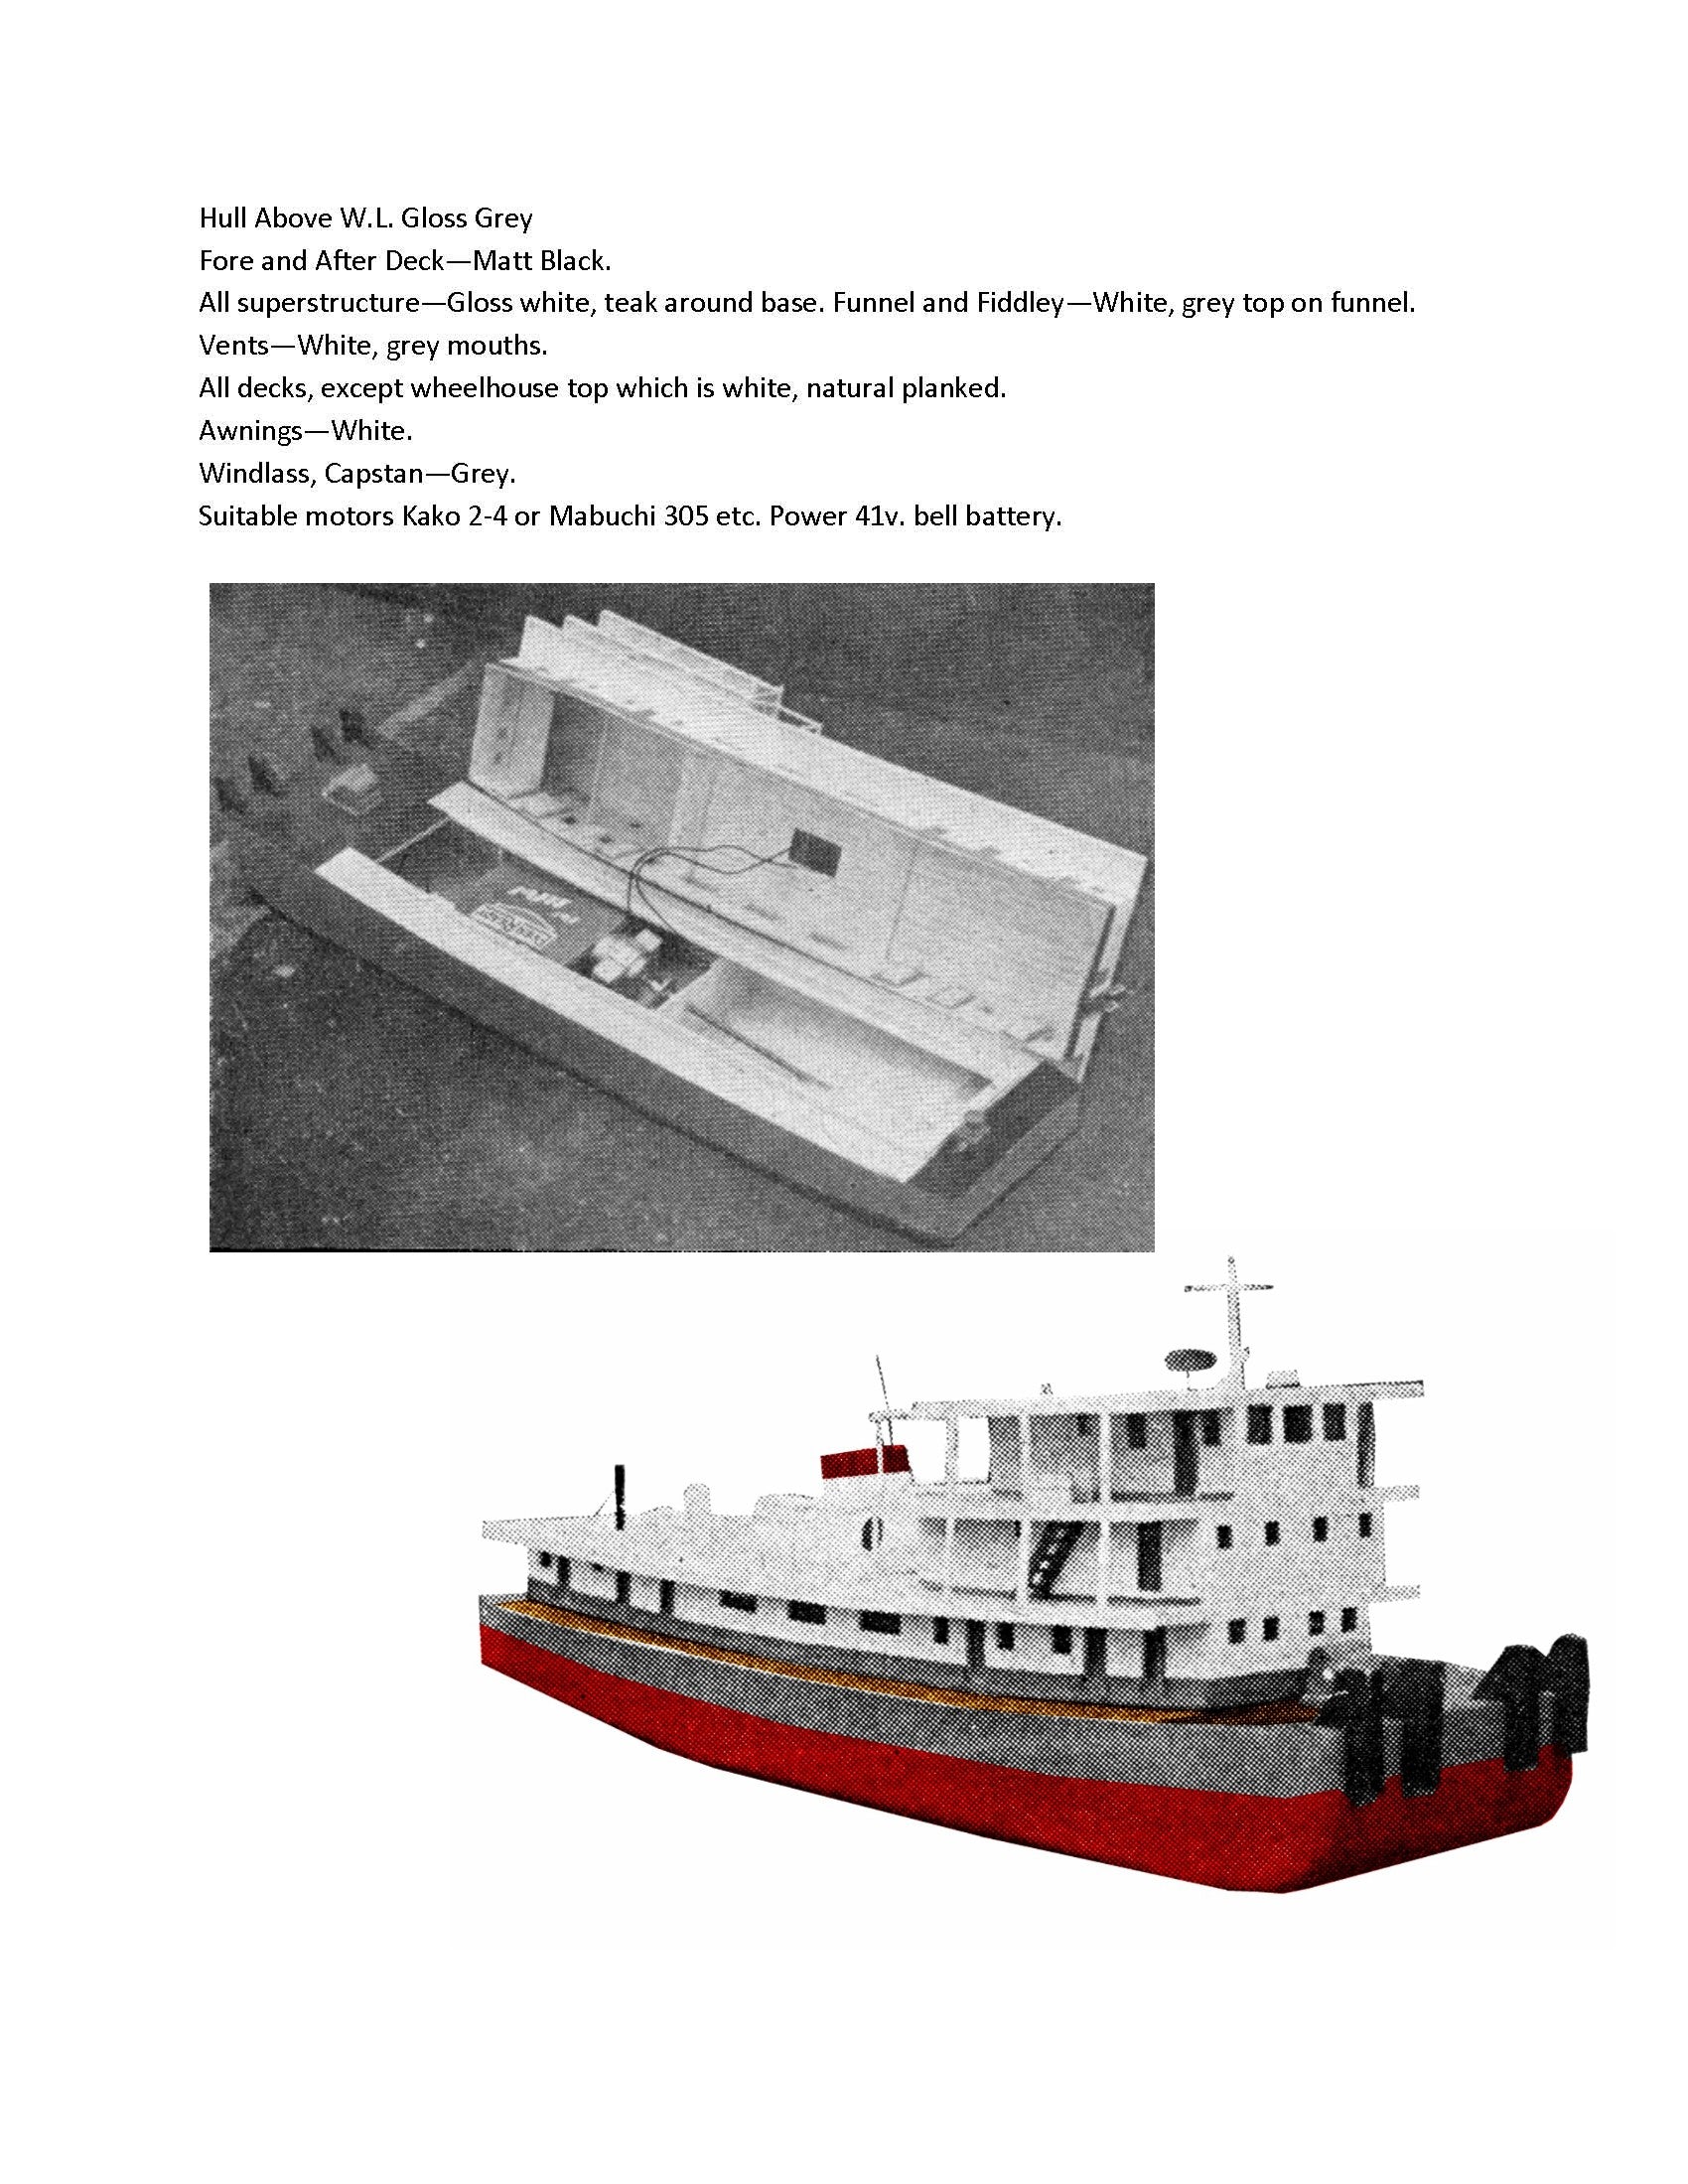 full size printed plan african push tug conakry scale 1:60  length 21 suitable for radio control